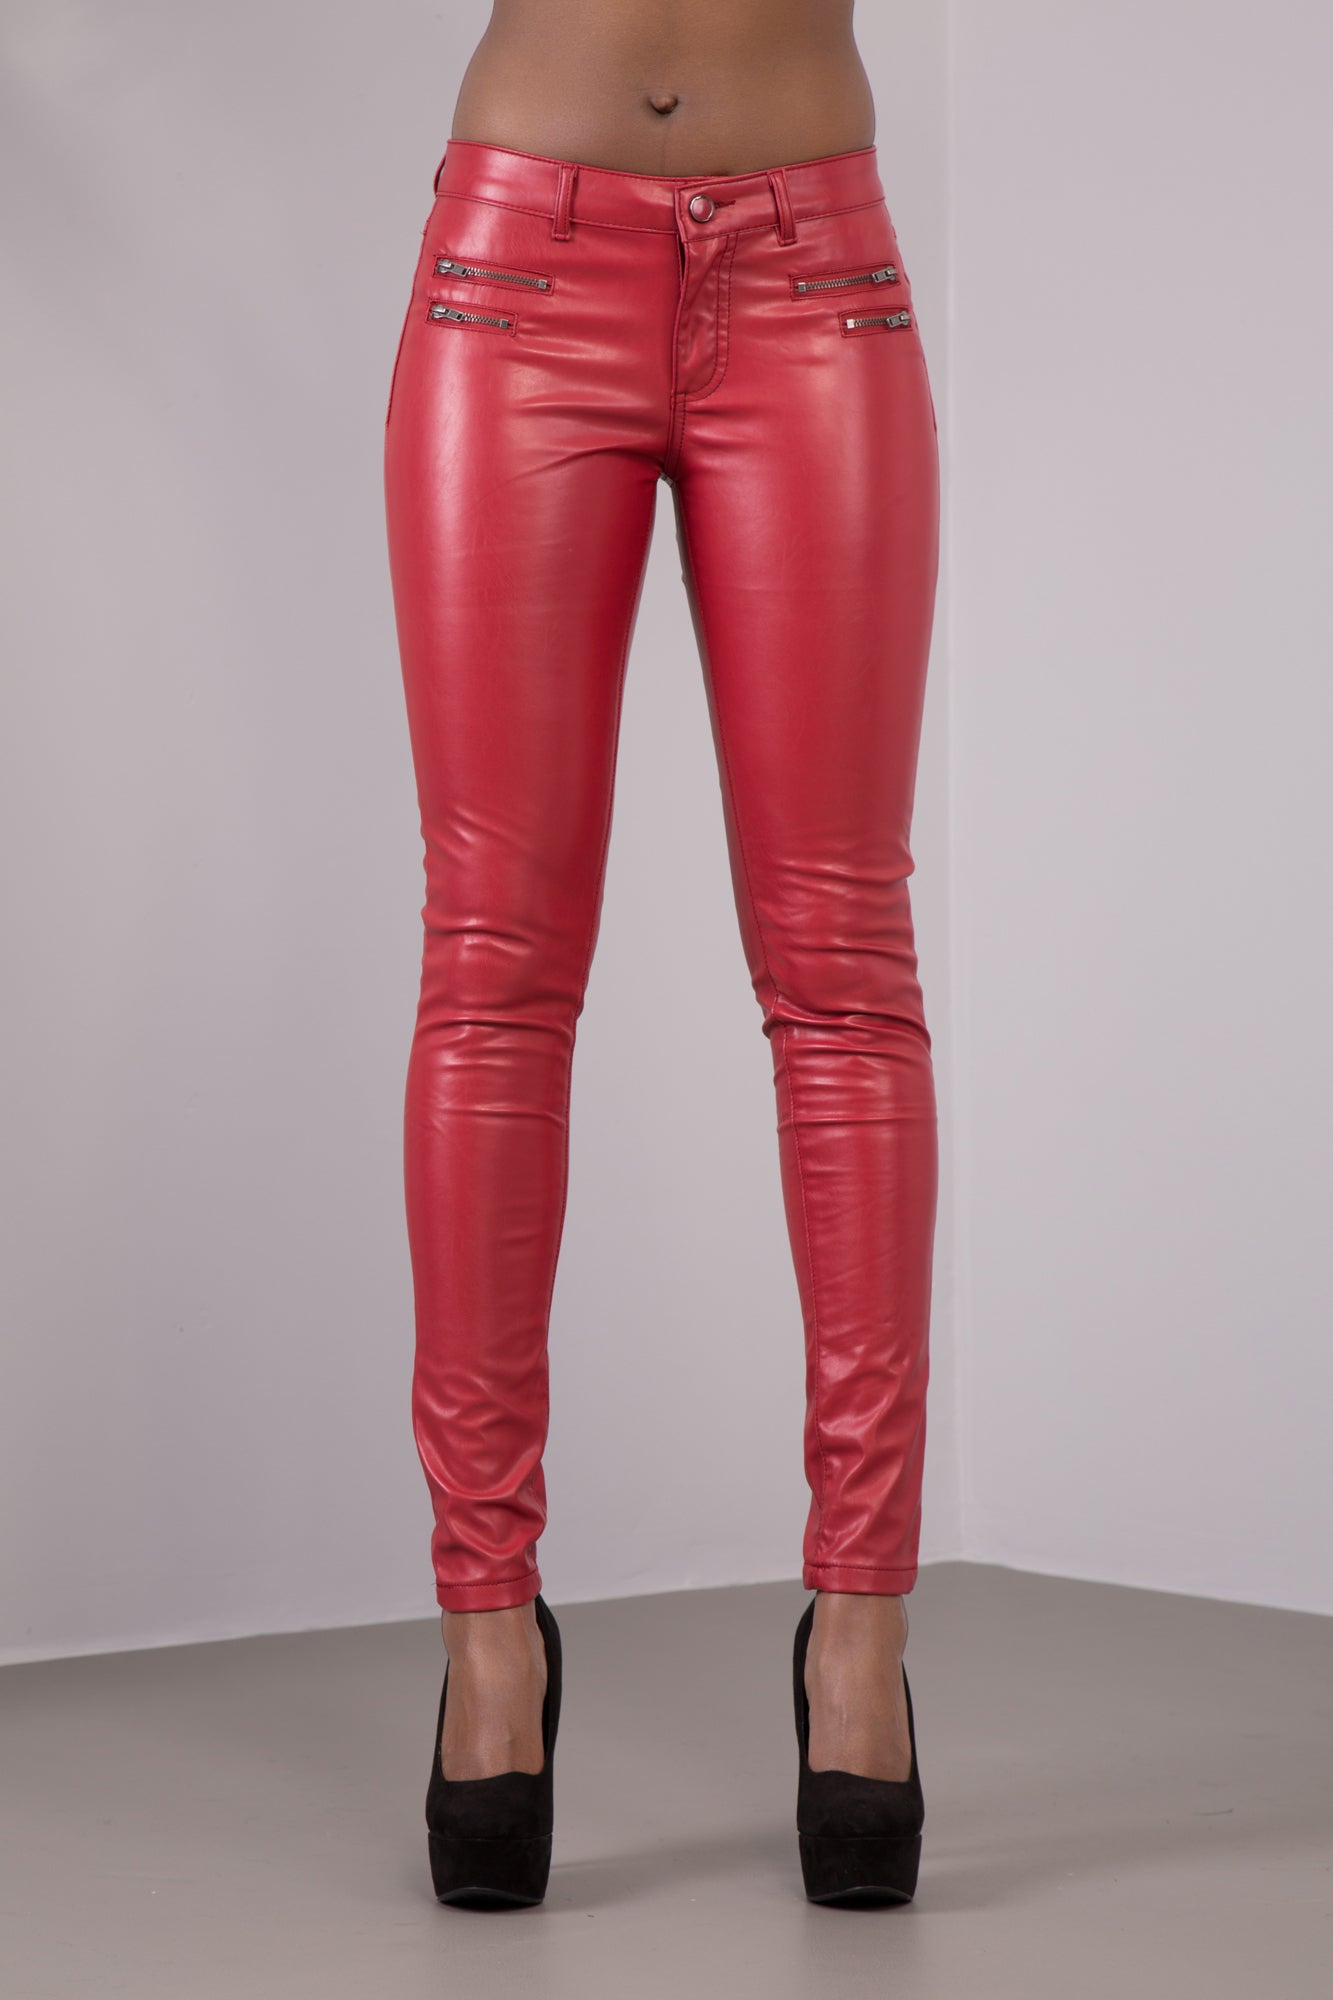 red leather jeans